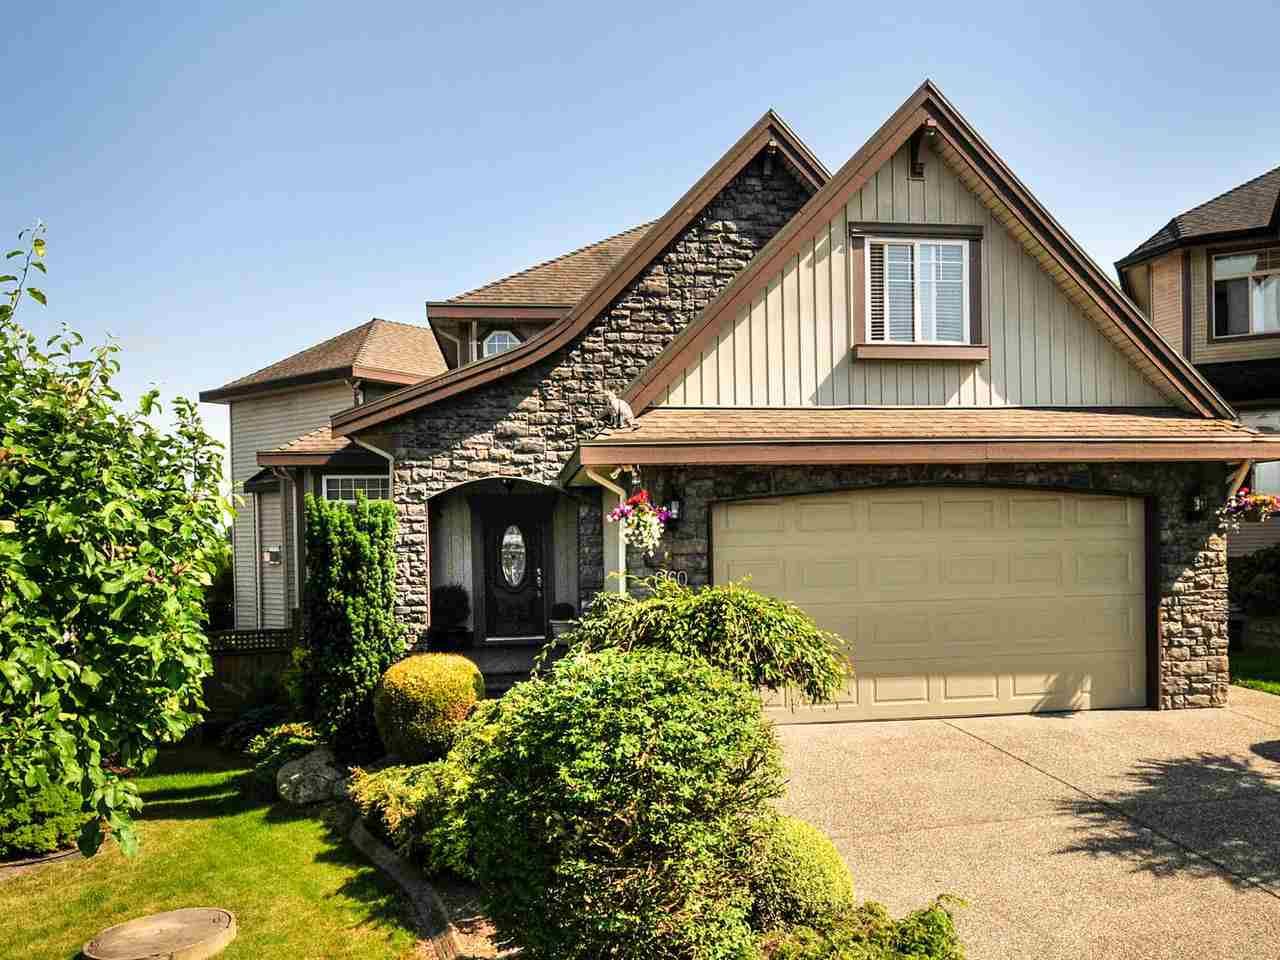 West Cloverdale Beauty! Fabulous 7bdrm/5bath custom design home w/4880sqft of spacious living. Situated on a private, fully fenced 7,309sqft lot with an endless view of the mountains. Quiet cul-de-sac location.  Bonus Air Conditioning and oversized garage